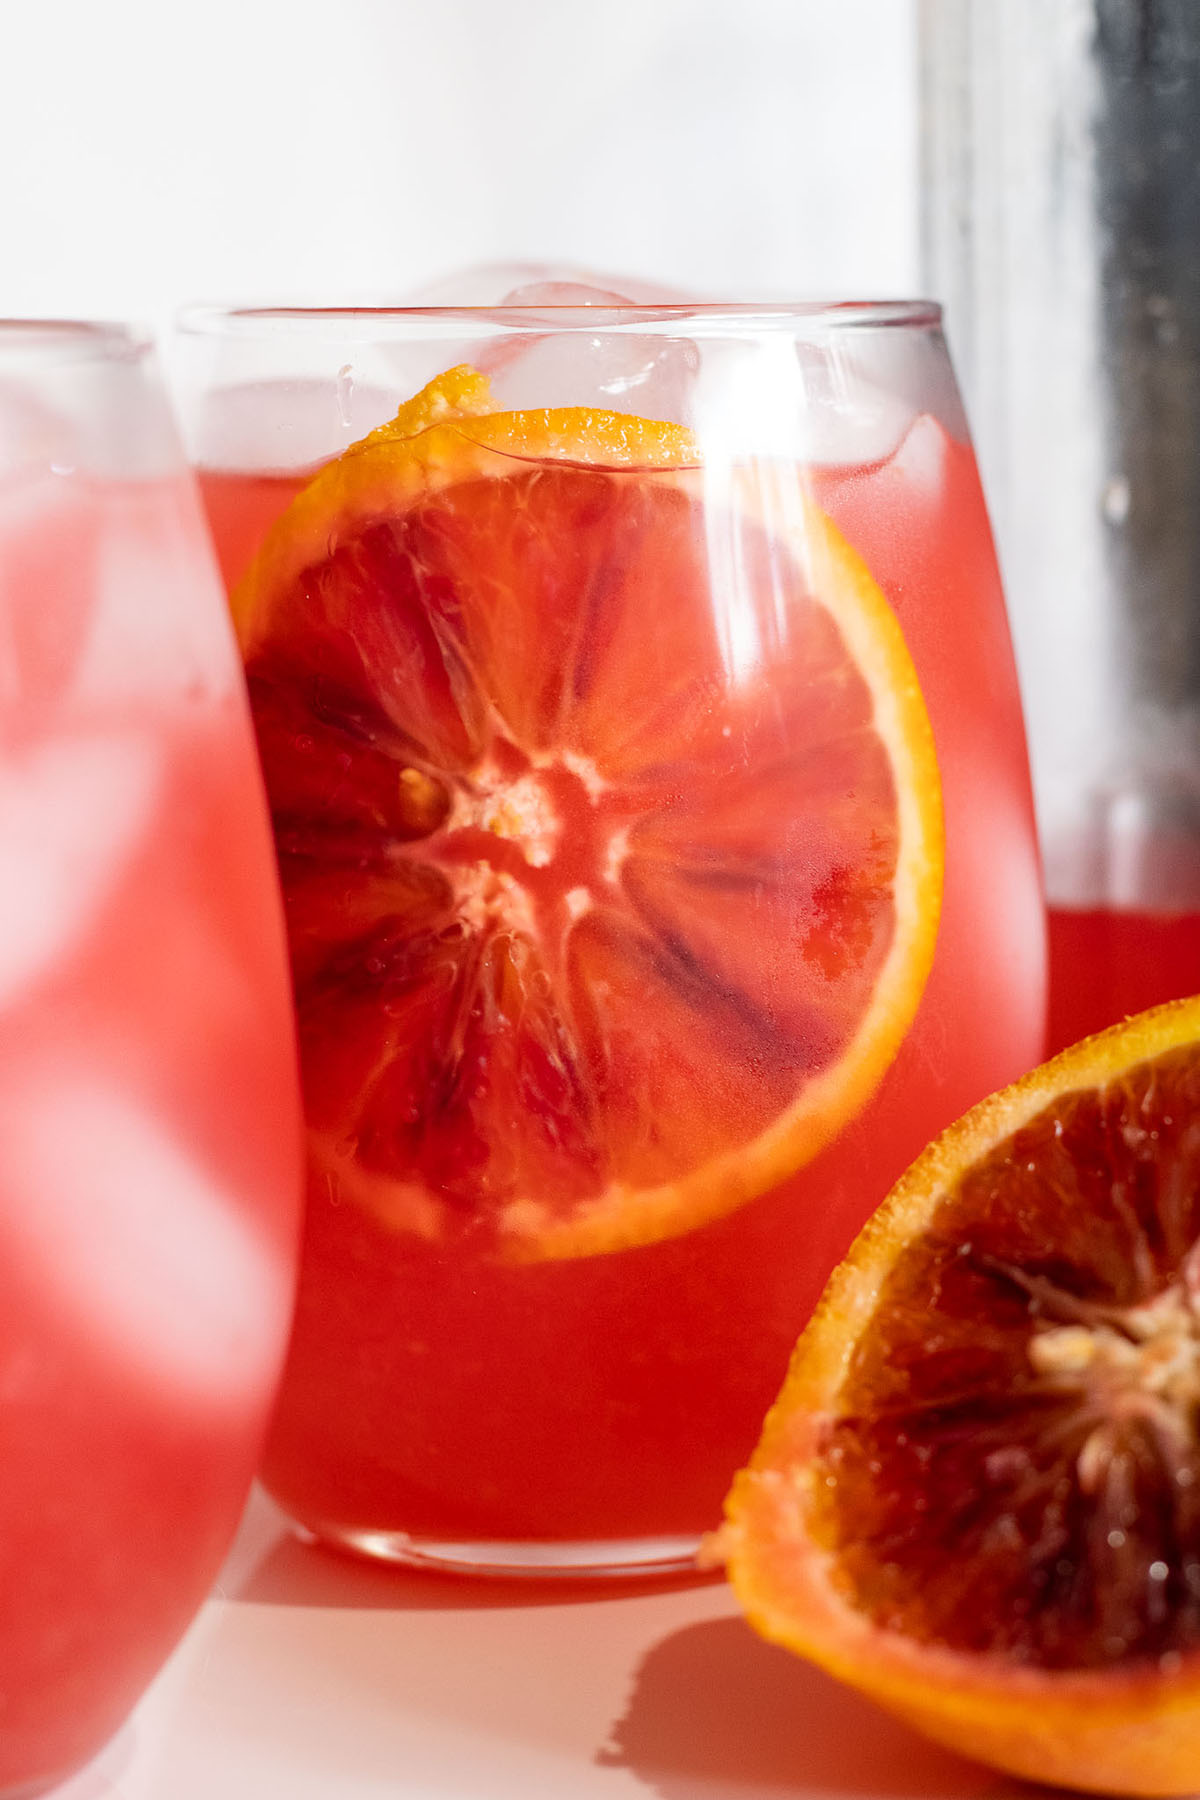 Close up of a slice of citrus inside a glass with a orangish red color.